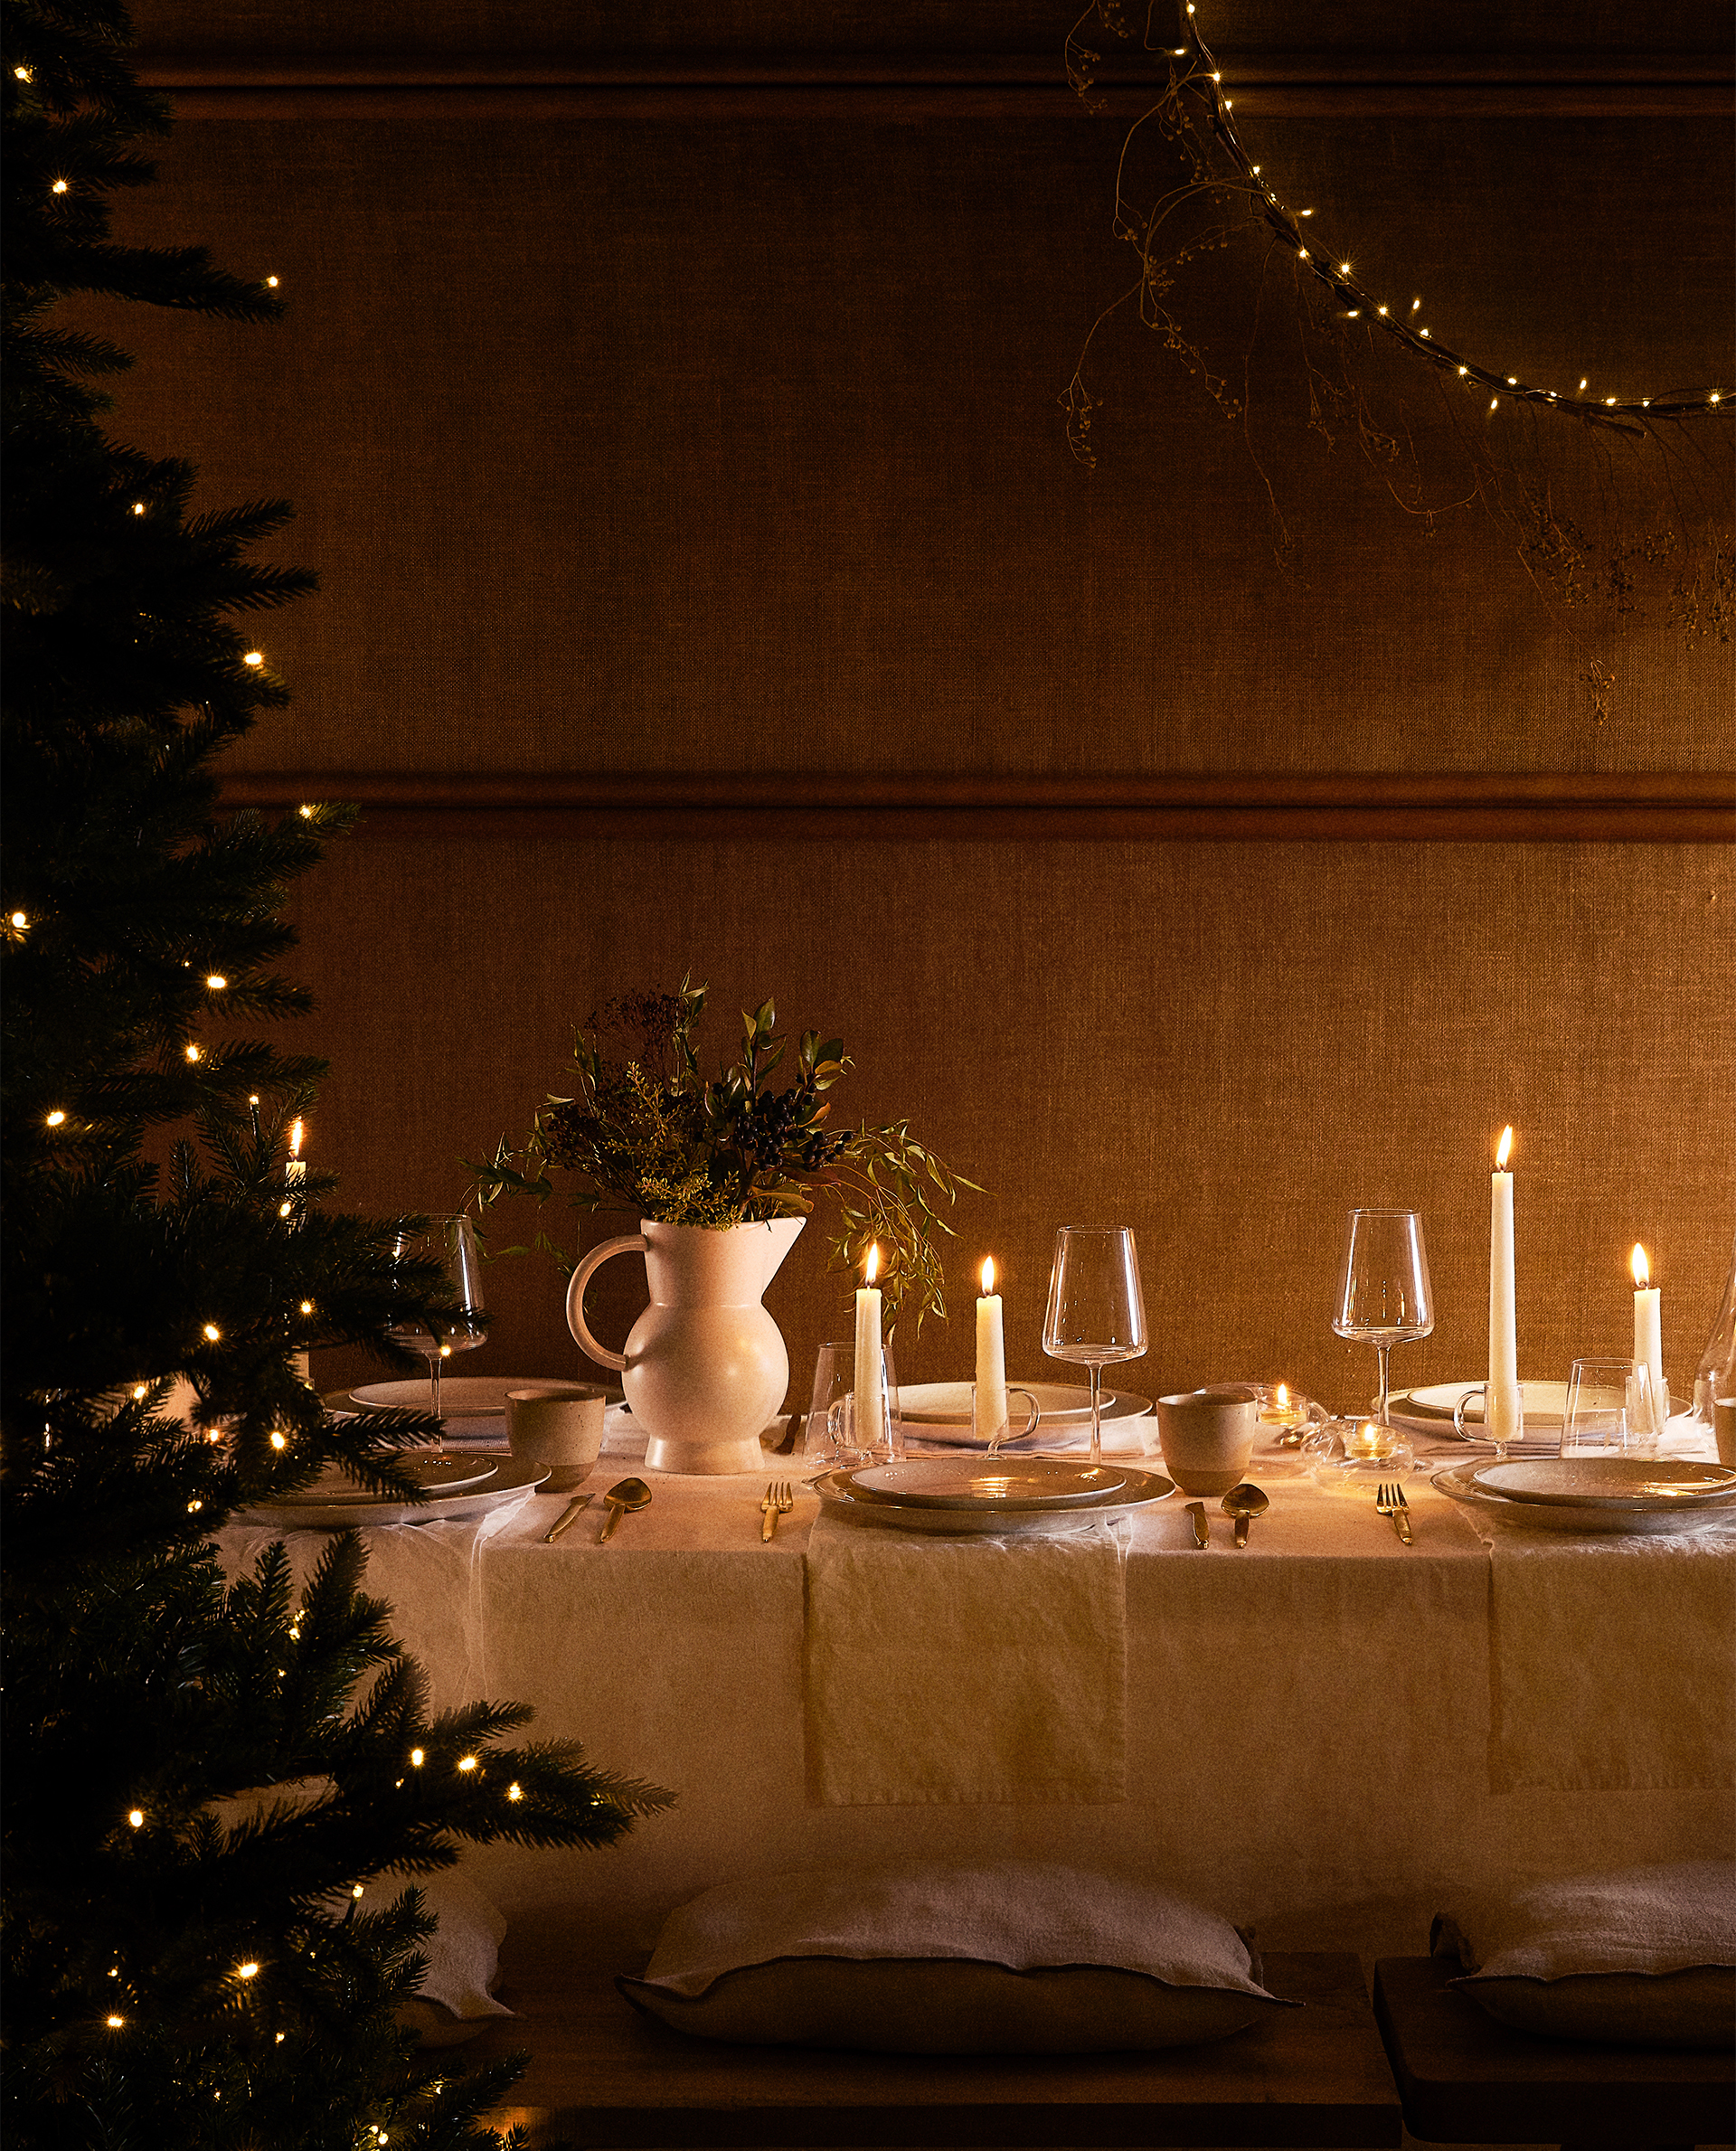 CHRISTMAS TABLE | Zara Home Norge / Norway